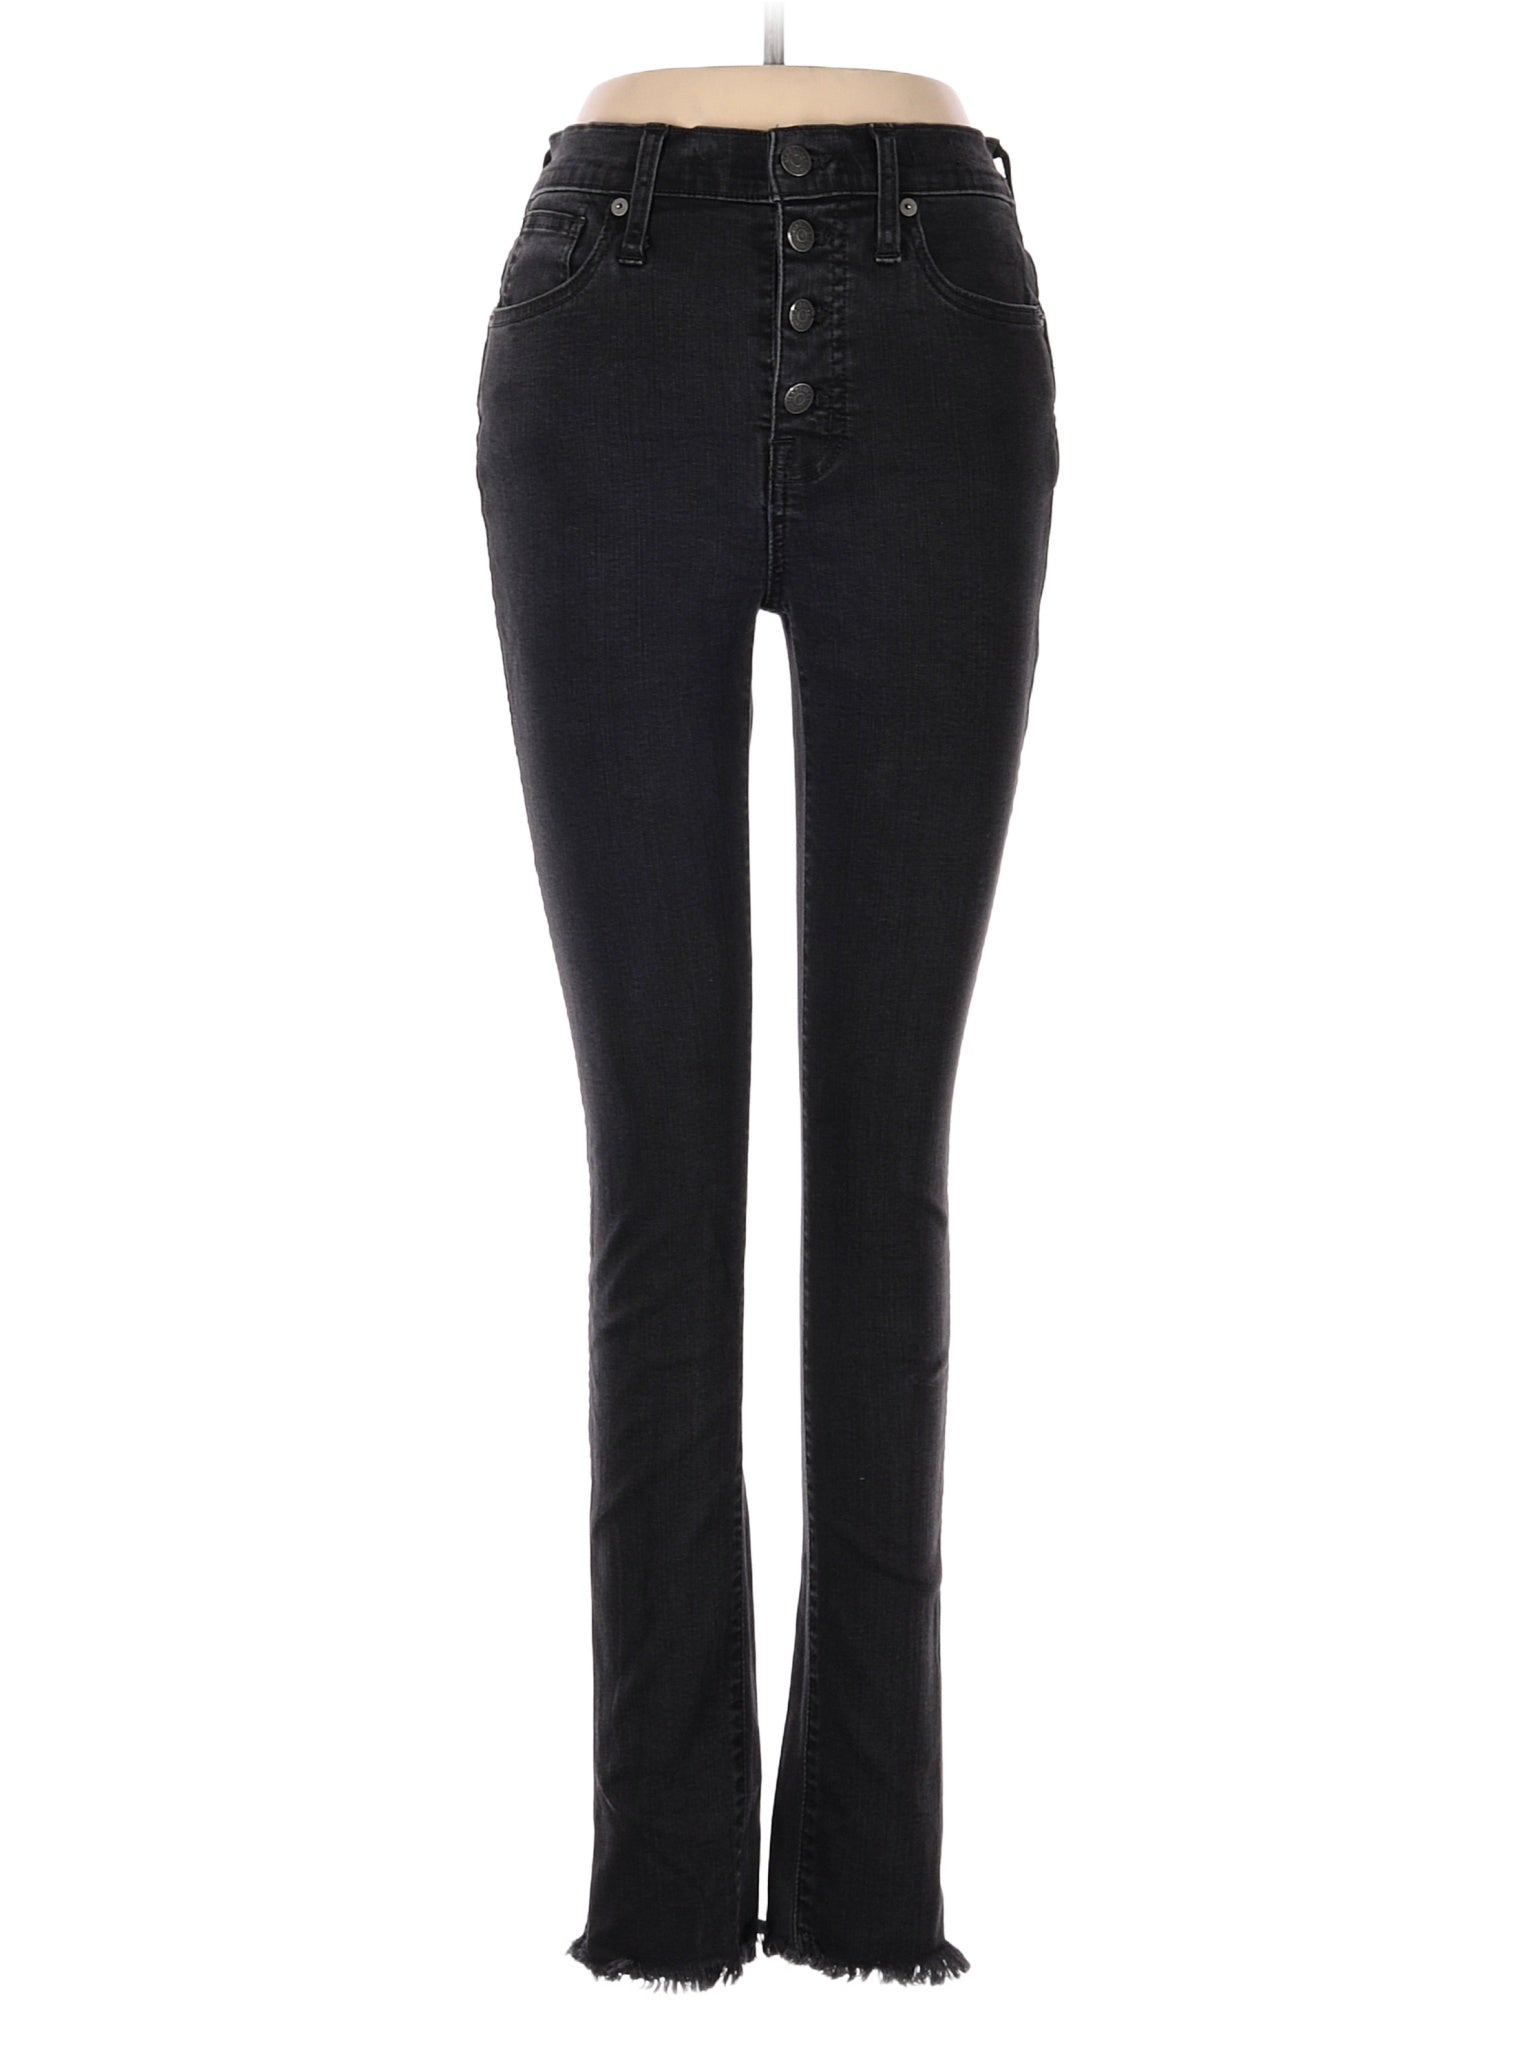 High-Rise Skinny 10" High-Rise Skinny Jeans In Berkeley Black: Button-Through Edition in Dark Wash waist size - 26